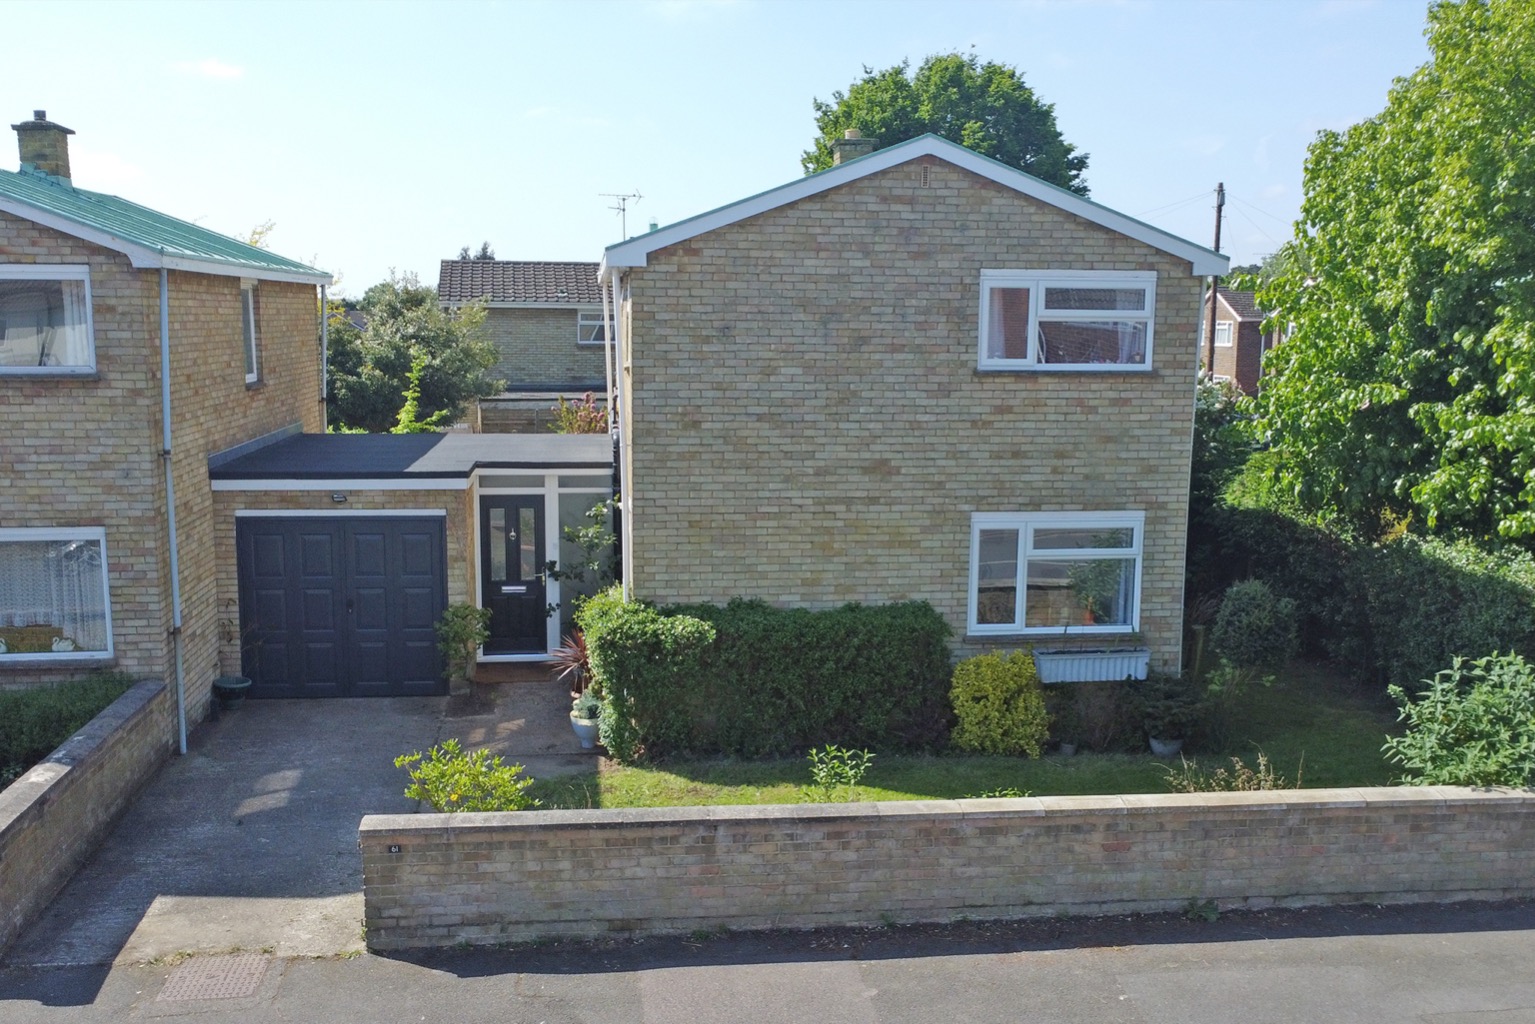 3 bed link detached house for sale in Wessex Way, SL6 